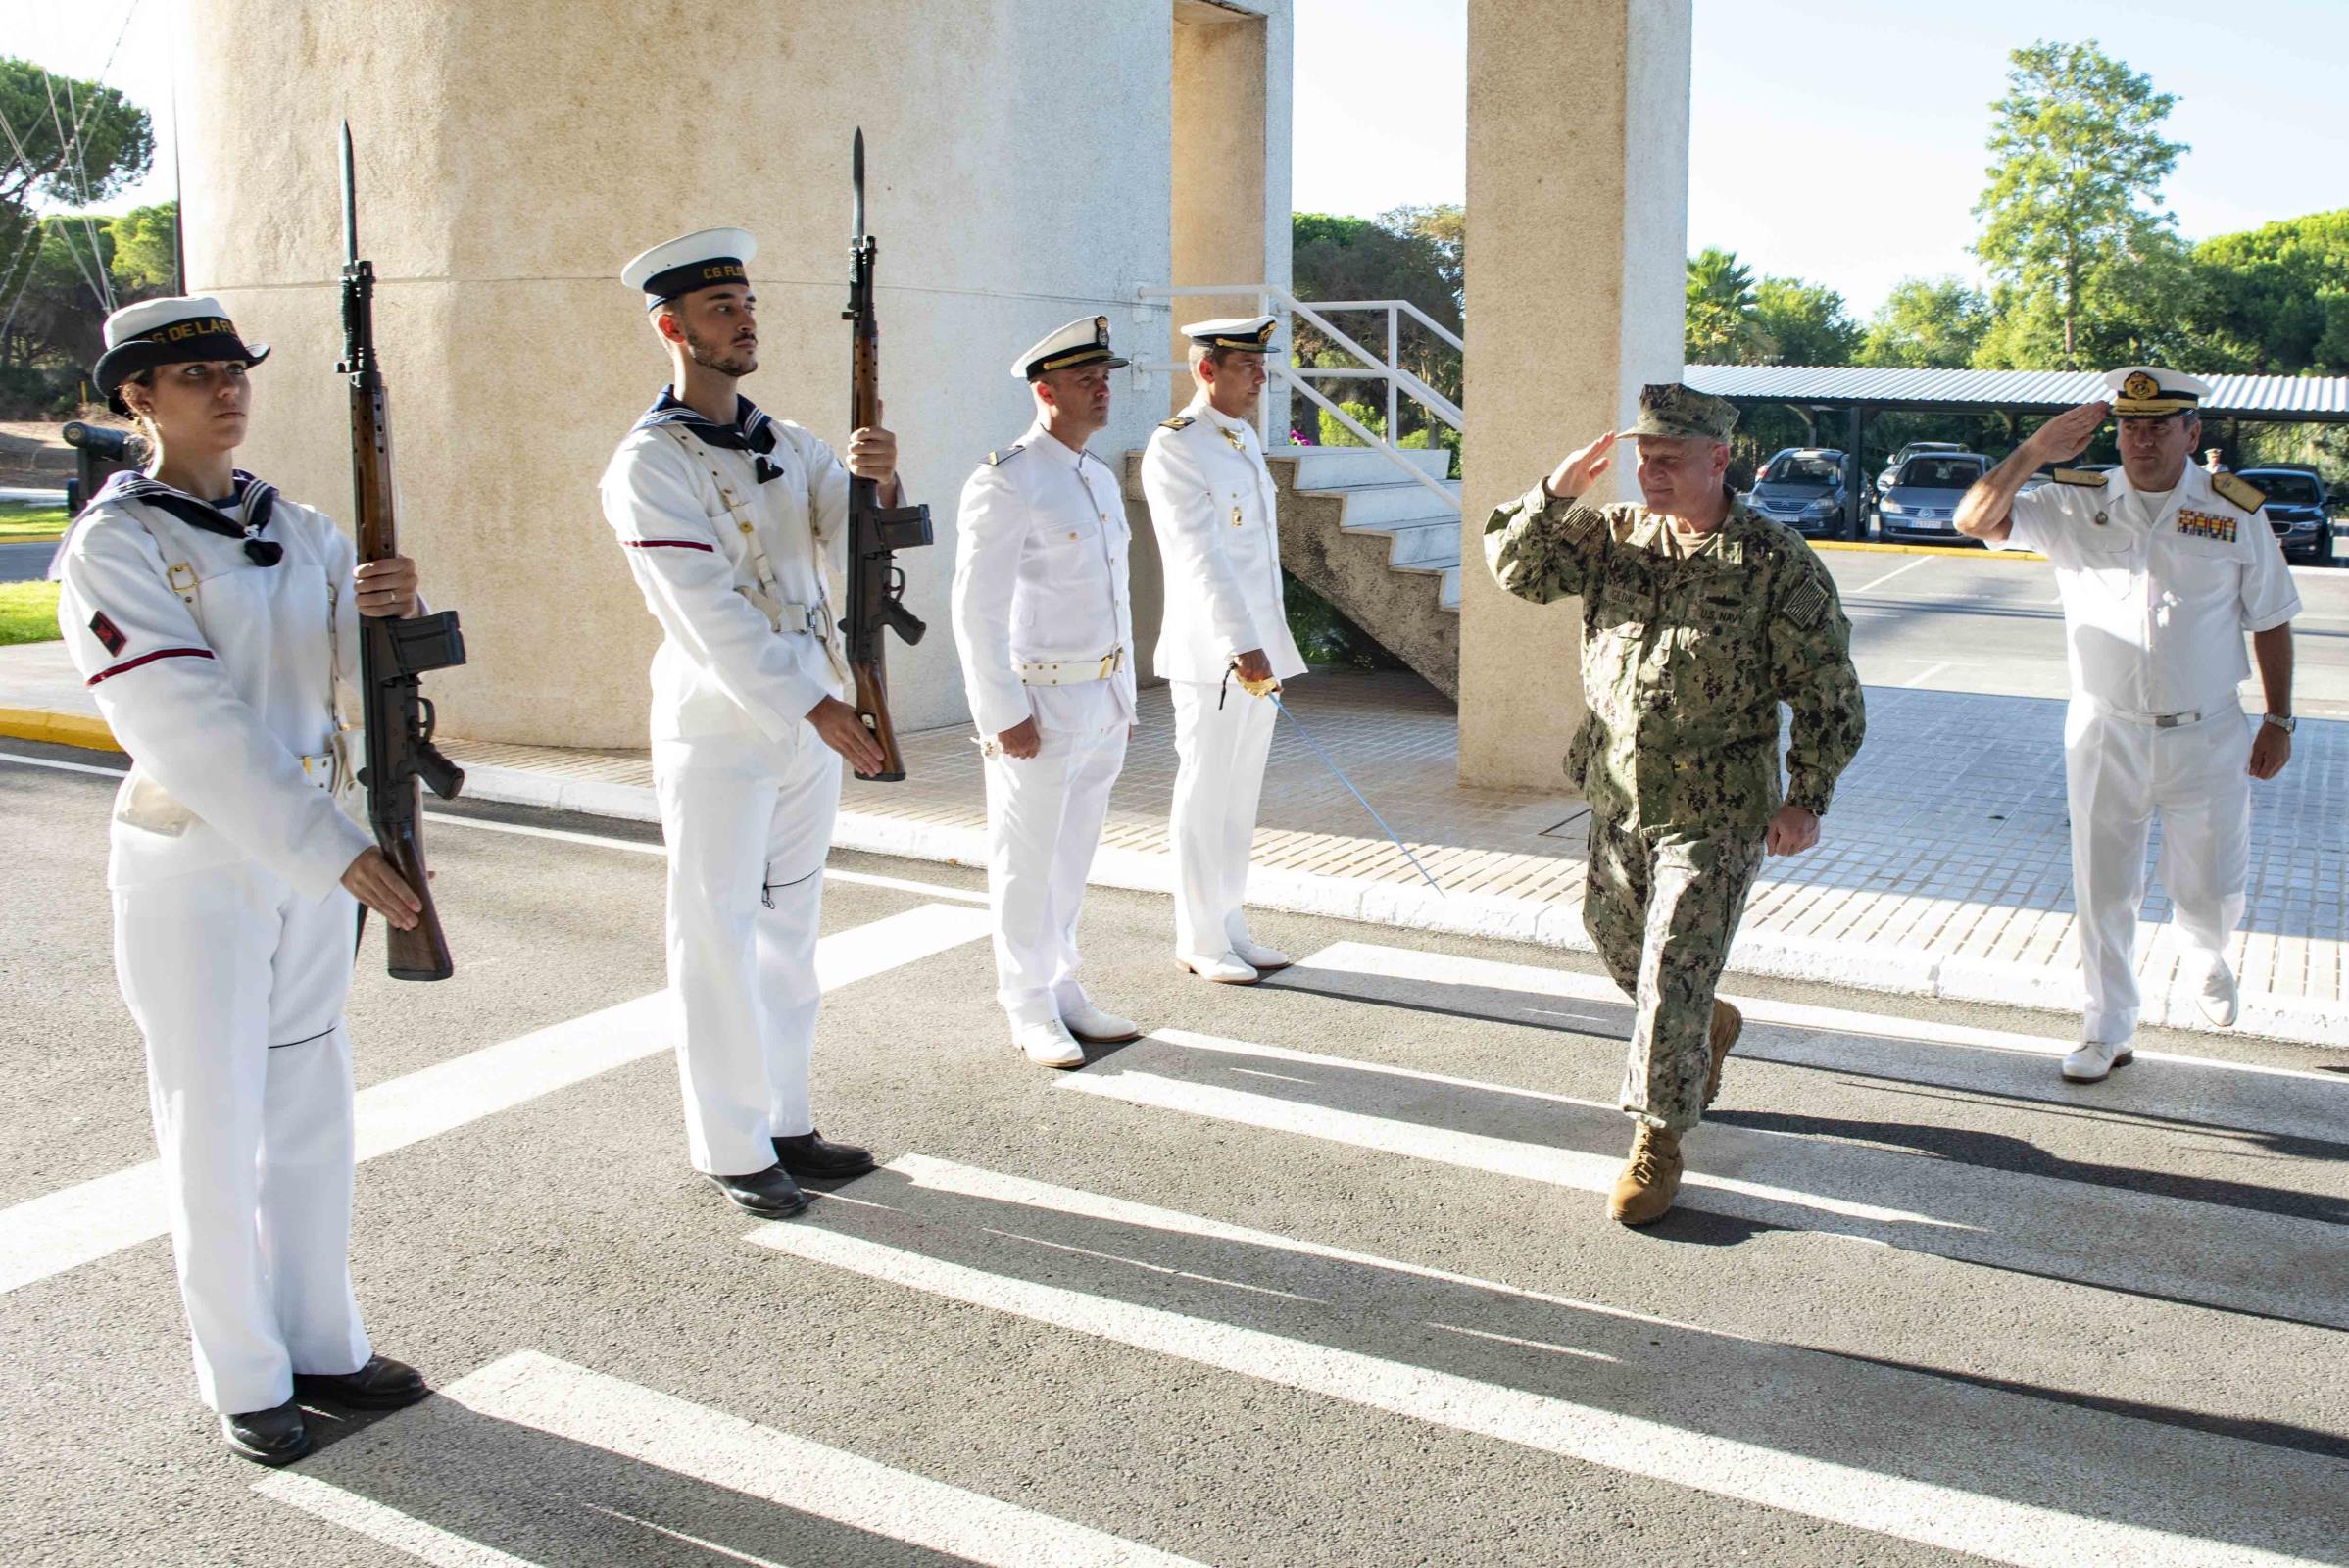 NAVAL STATION ROTA, Spain (Aug. 17, 2022) Chief of Naval Operations (CNO) Adm. Mike Gilday arrives at the Office of the Fleet Admiral to meet with Spanish navy Adm. Eugenio Díaz del Río Jáudenes, Admiral of the Spanish Fleet, during a visit to Rota, Spain, Aug. 17, 2022.  (U.S. Navy photo by Chief Mass Communication Specialist Amanda R. Gray) 220817-N-UD469-1086 